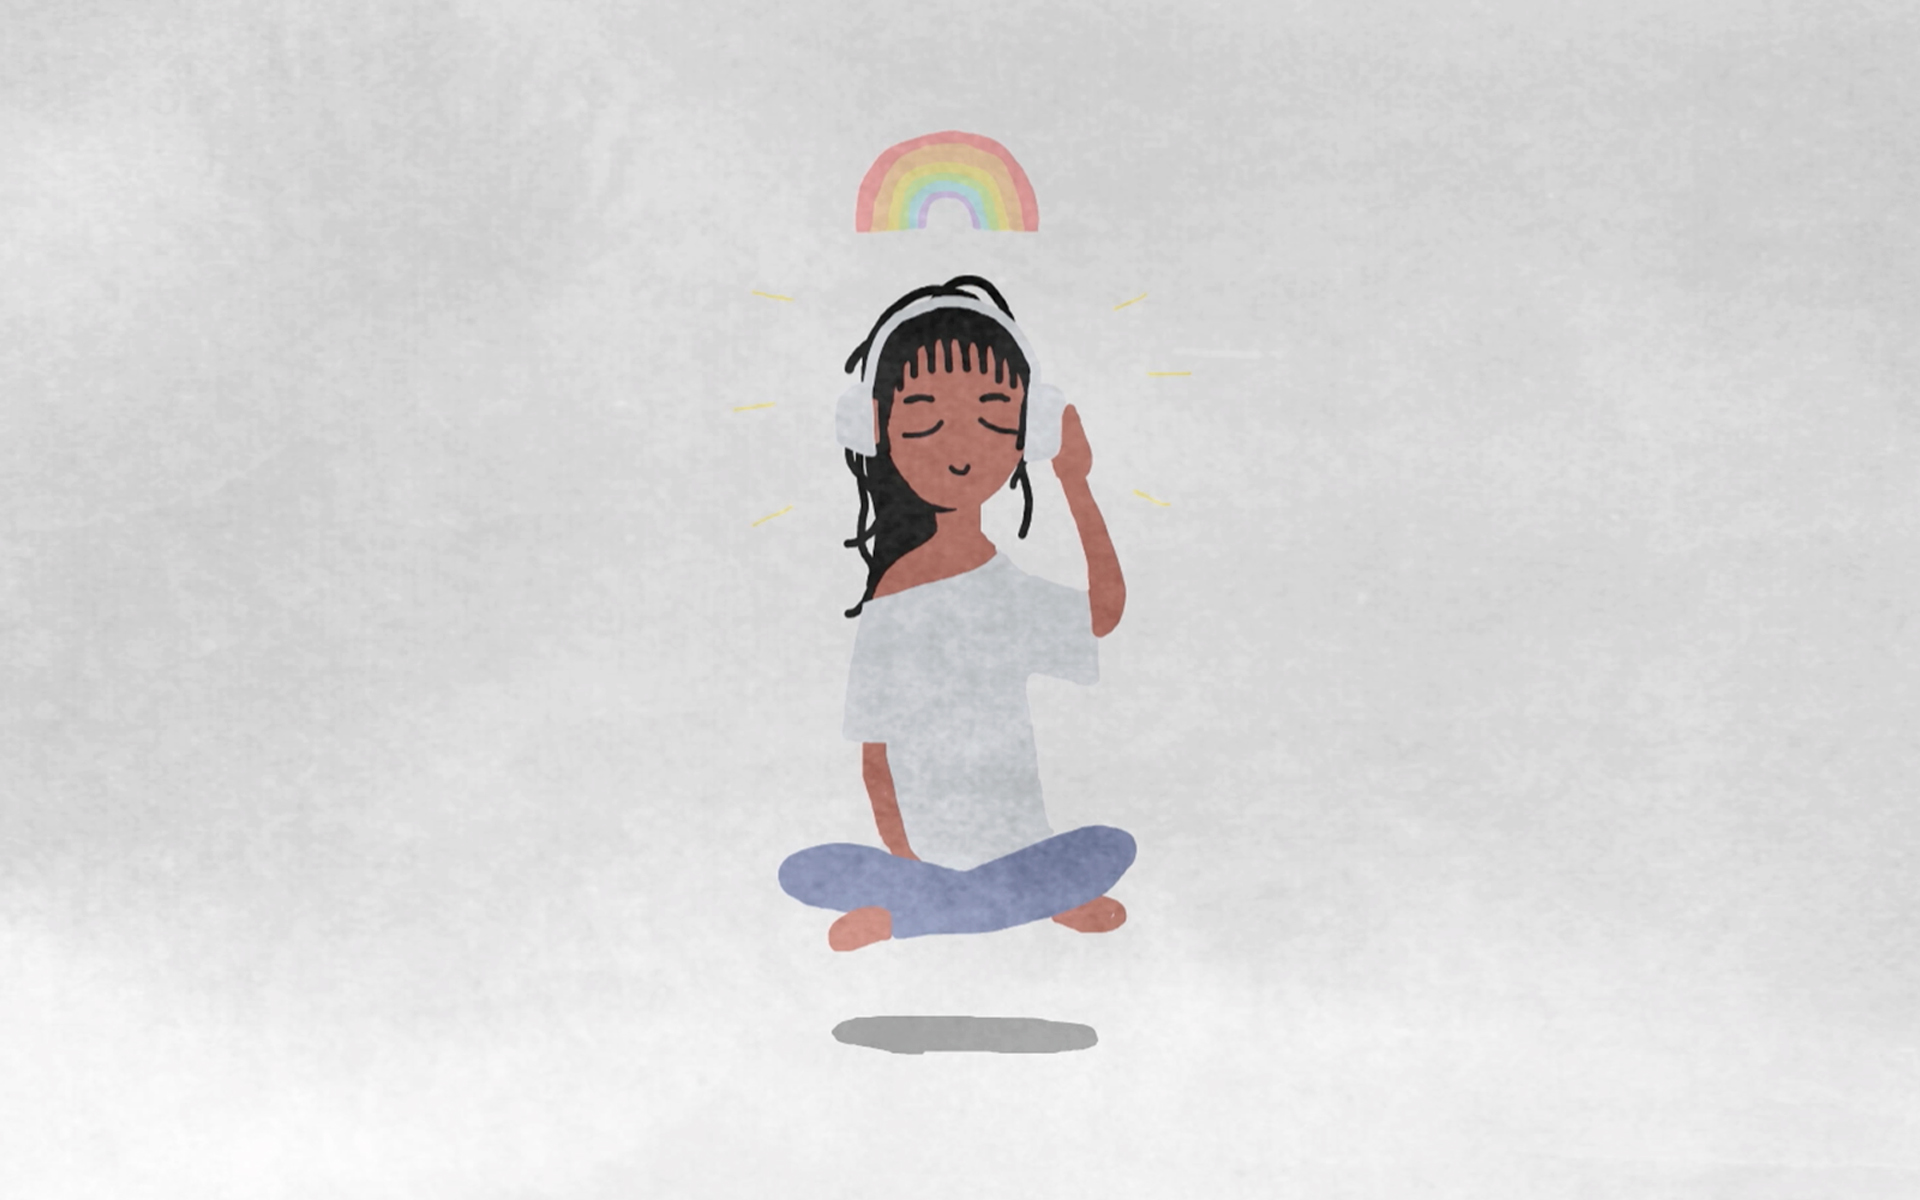 An animated woman levitates while listening to music and attaining inner peace, which is represented by the rainbow above her head.